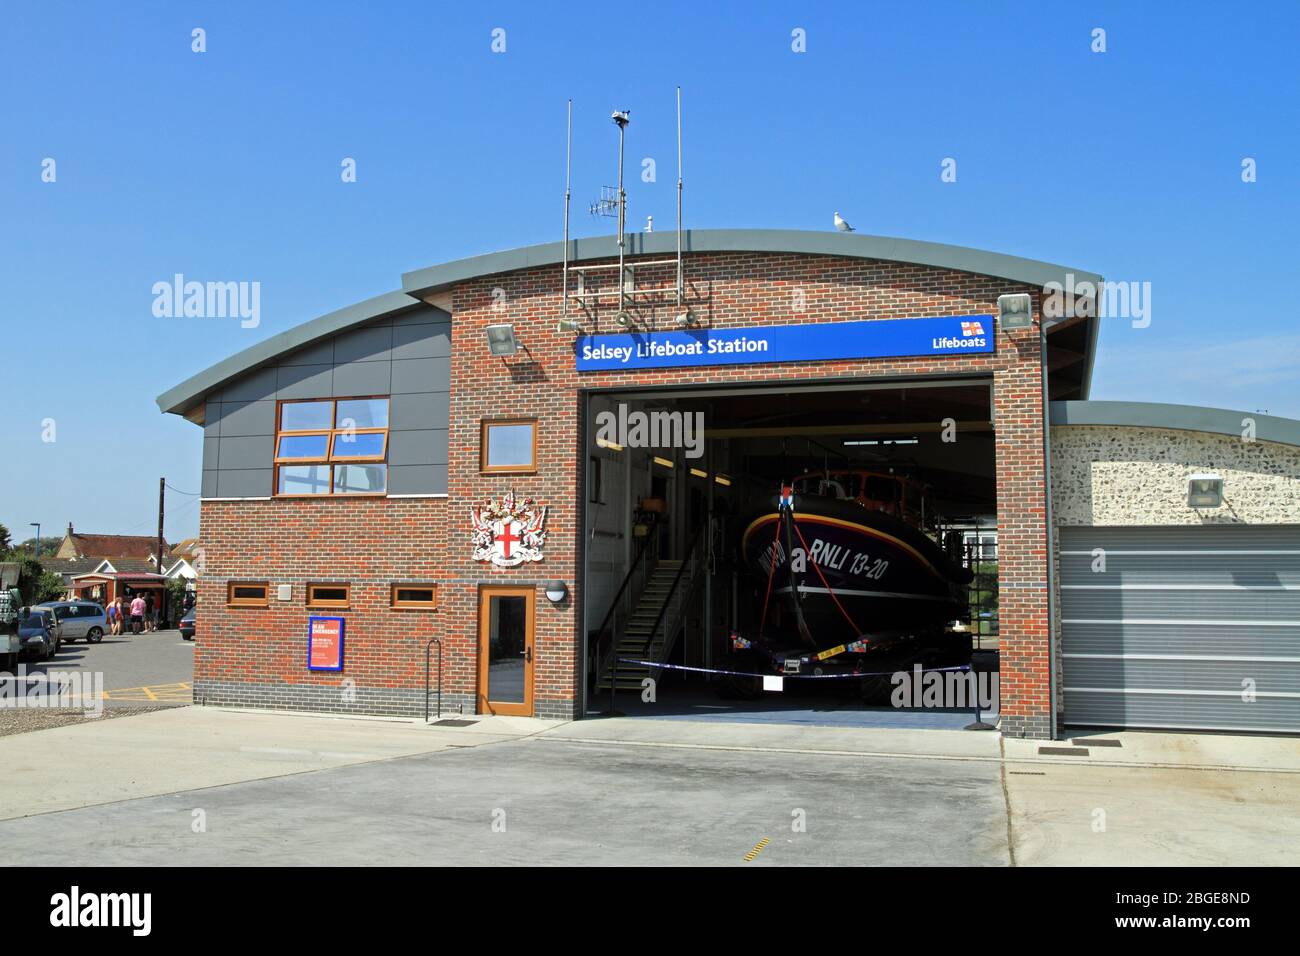 Selsey Lifeboat Station, Selsey, West Sussex, Inghilterra. Foto Stock